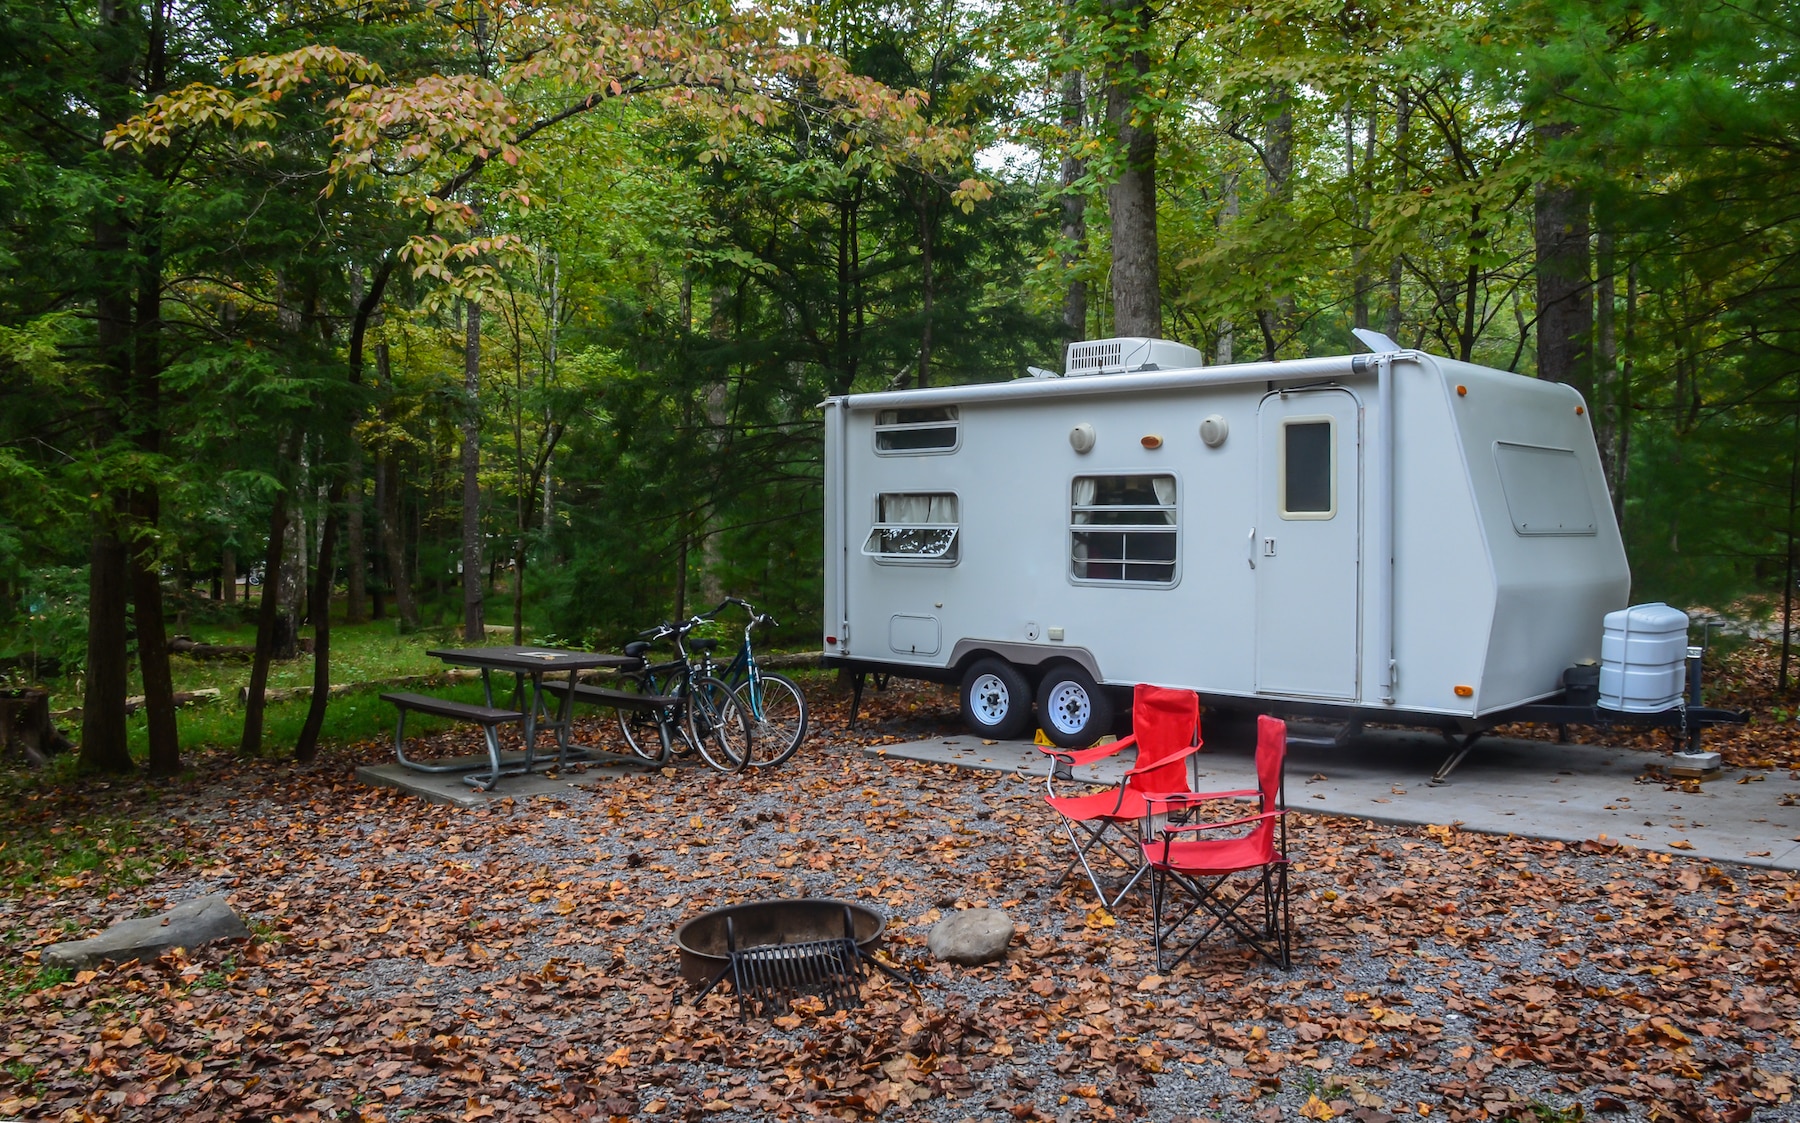 Camp trailer set up in campground site with bicycles